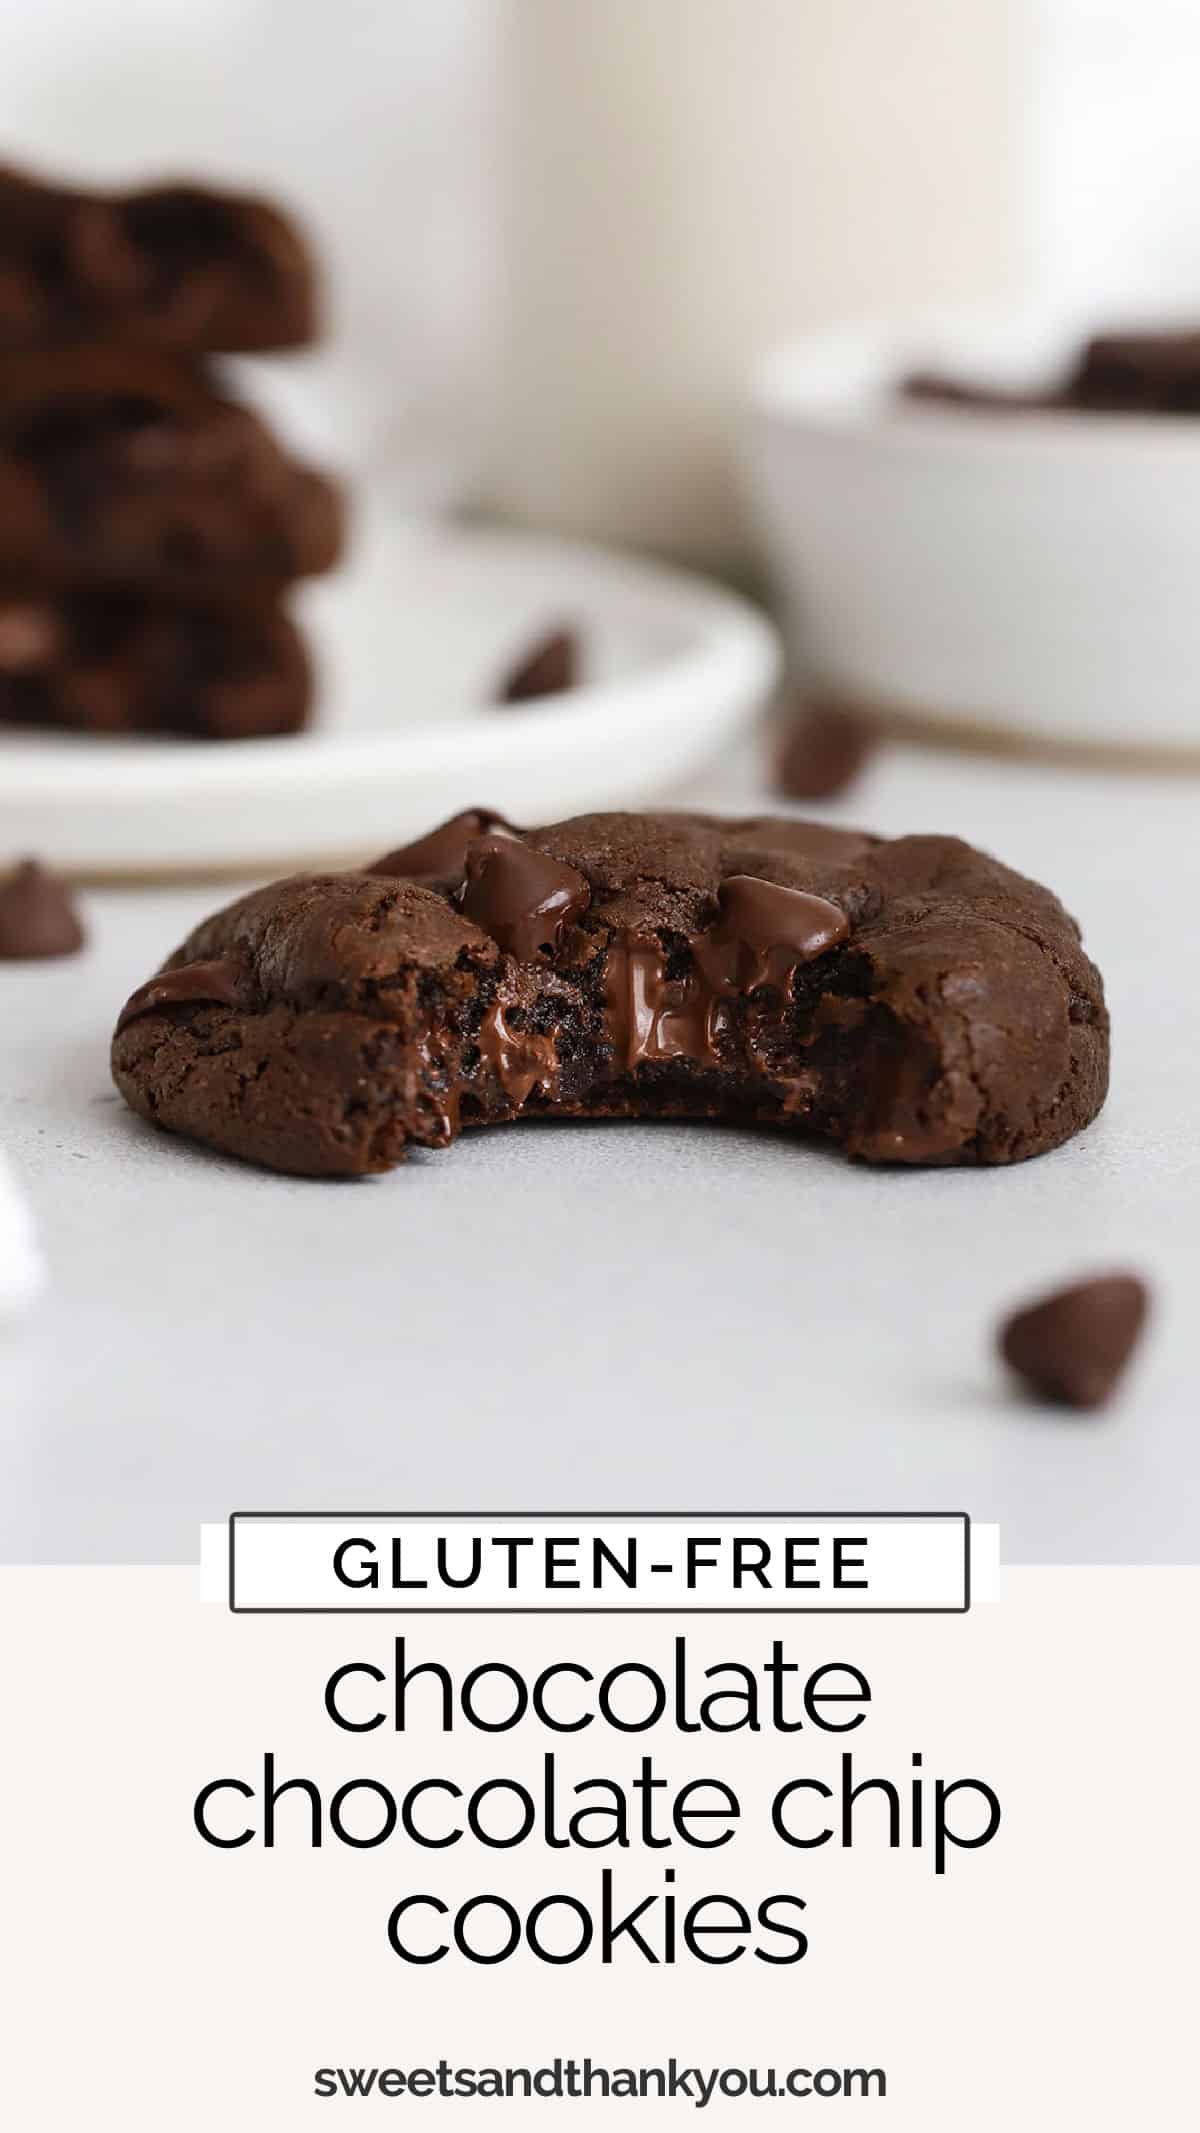 Gluten-Free Chocolate Chocolate Chip Cookies. Made with a chocolate cookie base, and plenty of chocolate chips, these gluten-free double-chocolate chip cookies are made for chocolate lovers! // gluten free double chocolate cookies / gluten free chocolate chocolate cookies recipe / gluten free cookie recipe / gluten free chocolate cookie recipe / gluten free cookies / gluten free chocolate chip cookies / gluten free cookie recipes